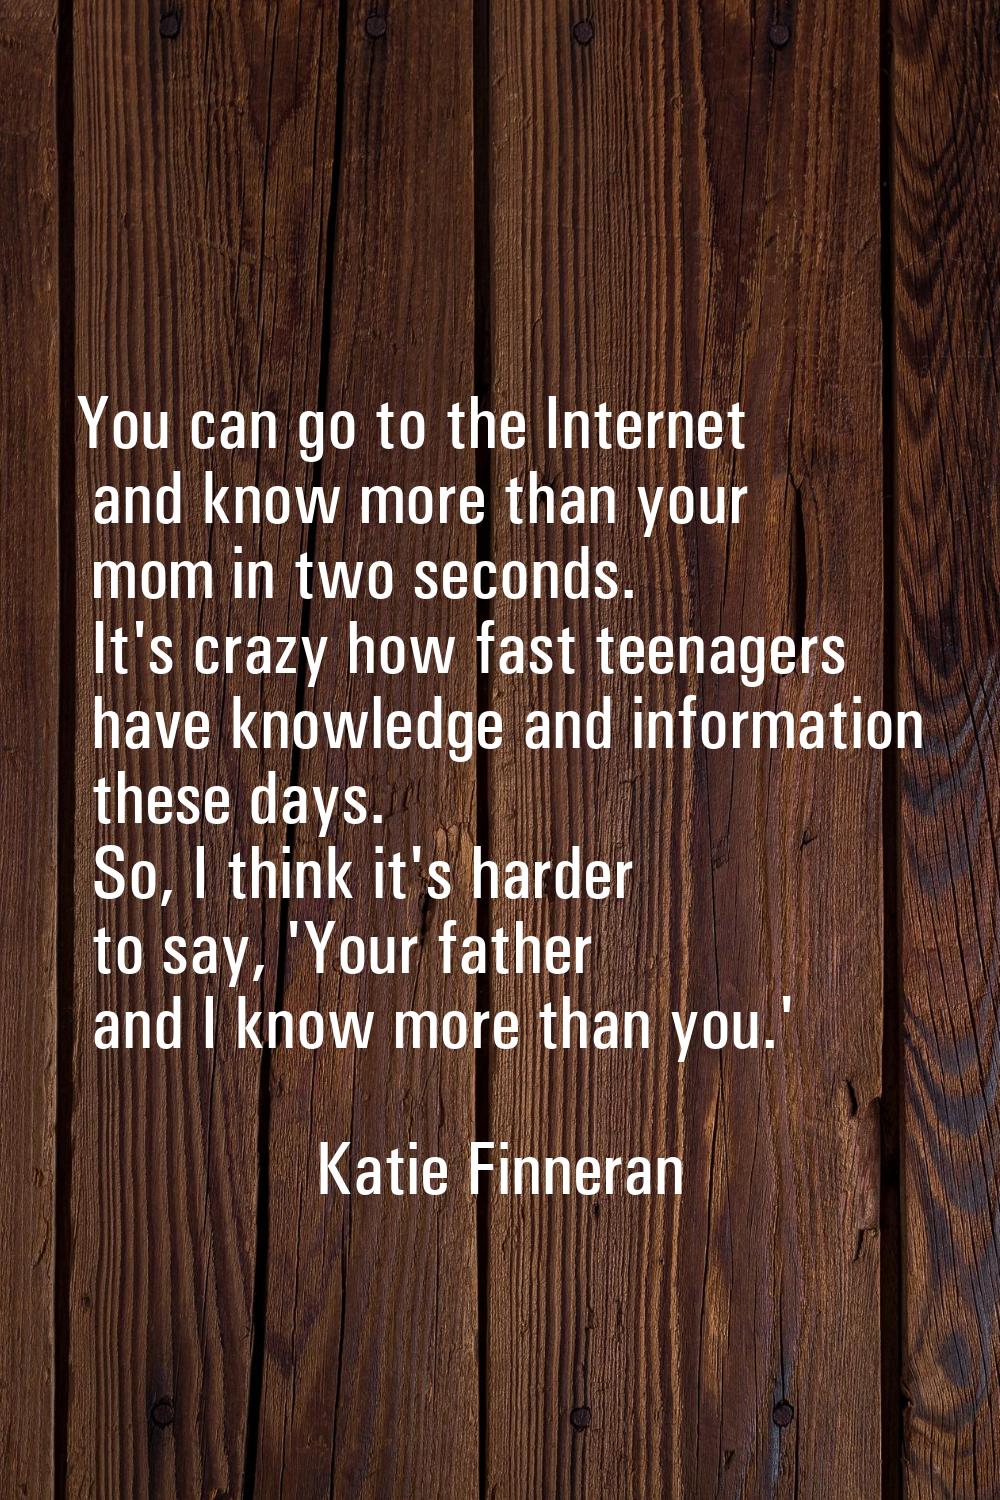 You can go to the Internet and know more than your mom in two seconds. It's crazy how fast teenager